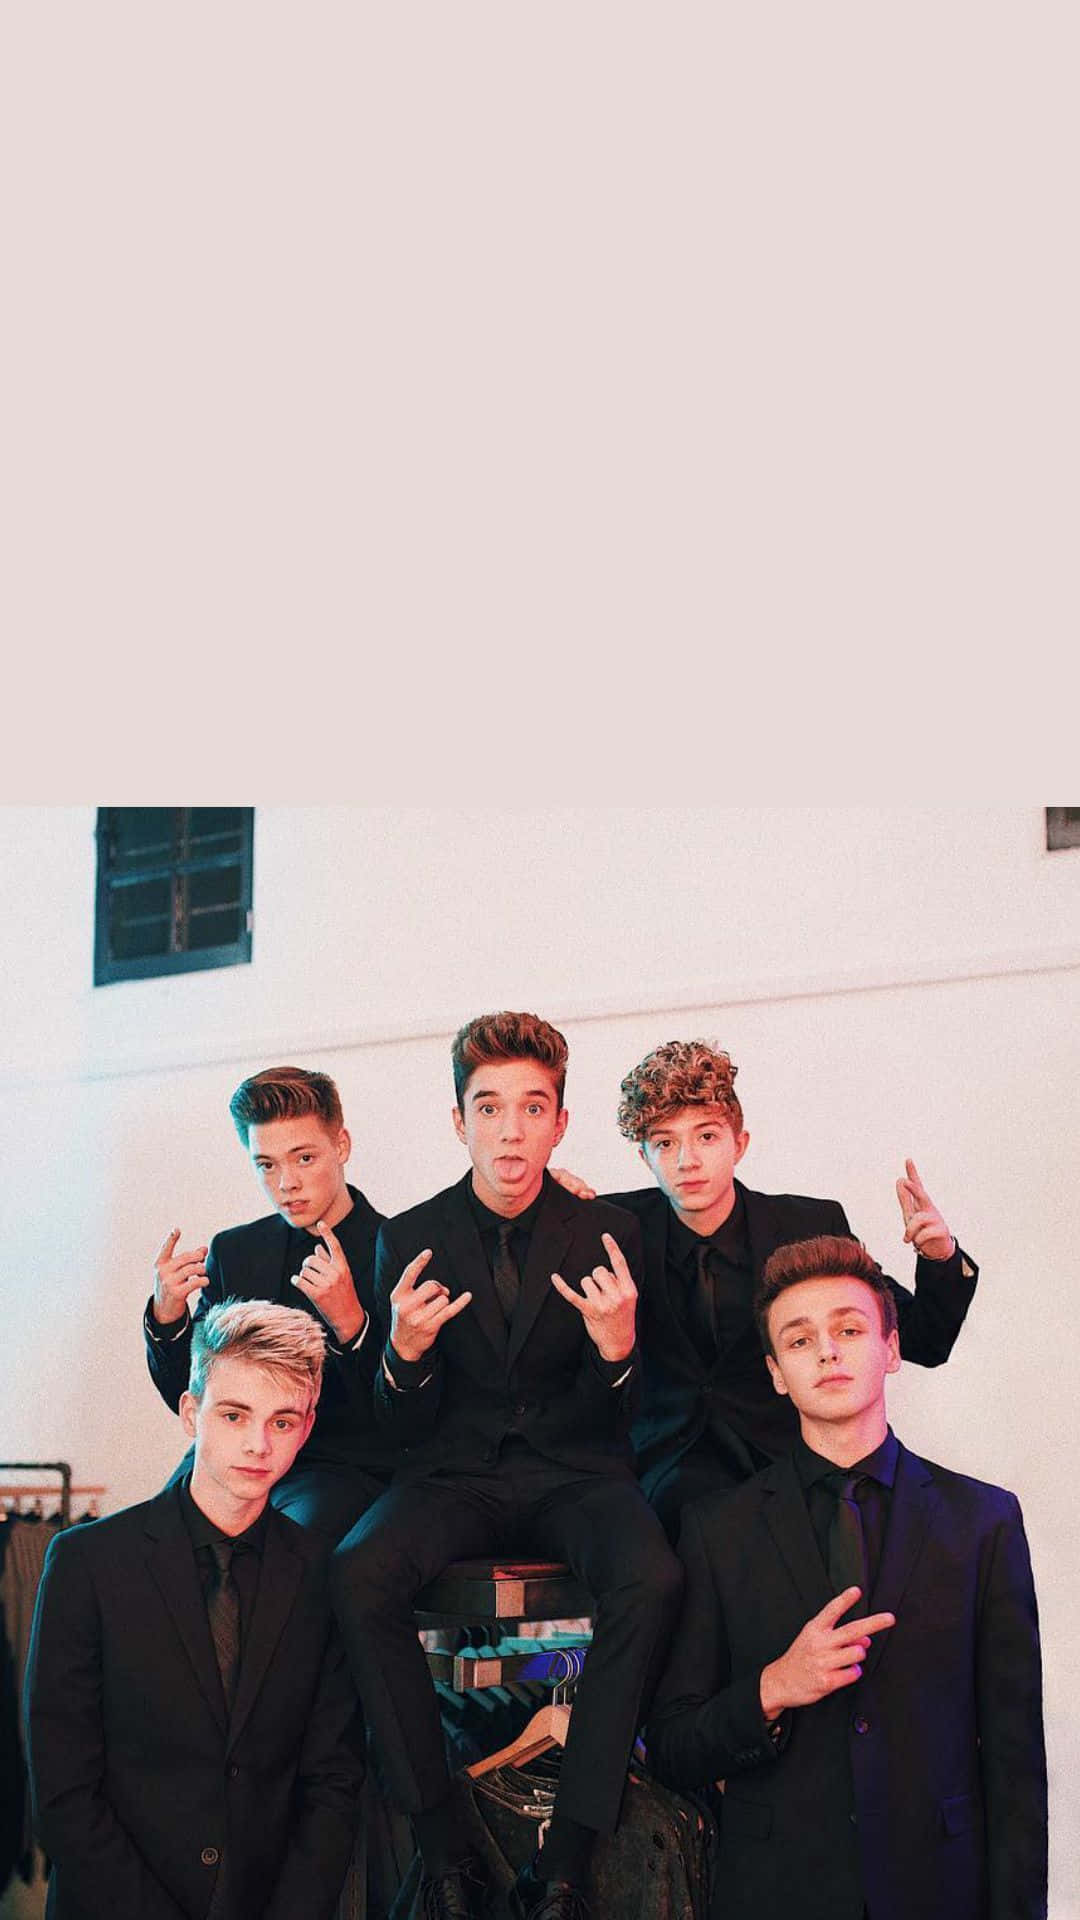 American Boy Band Why Don't We Wearing Black Suits Wallpaper